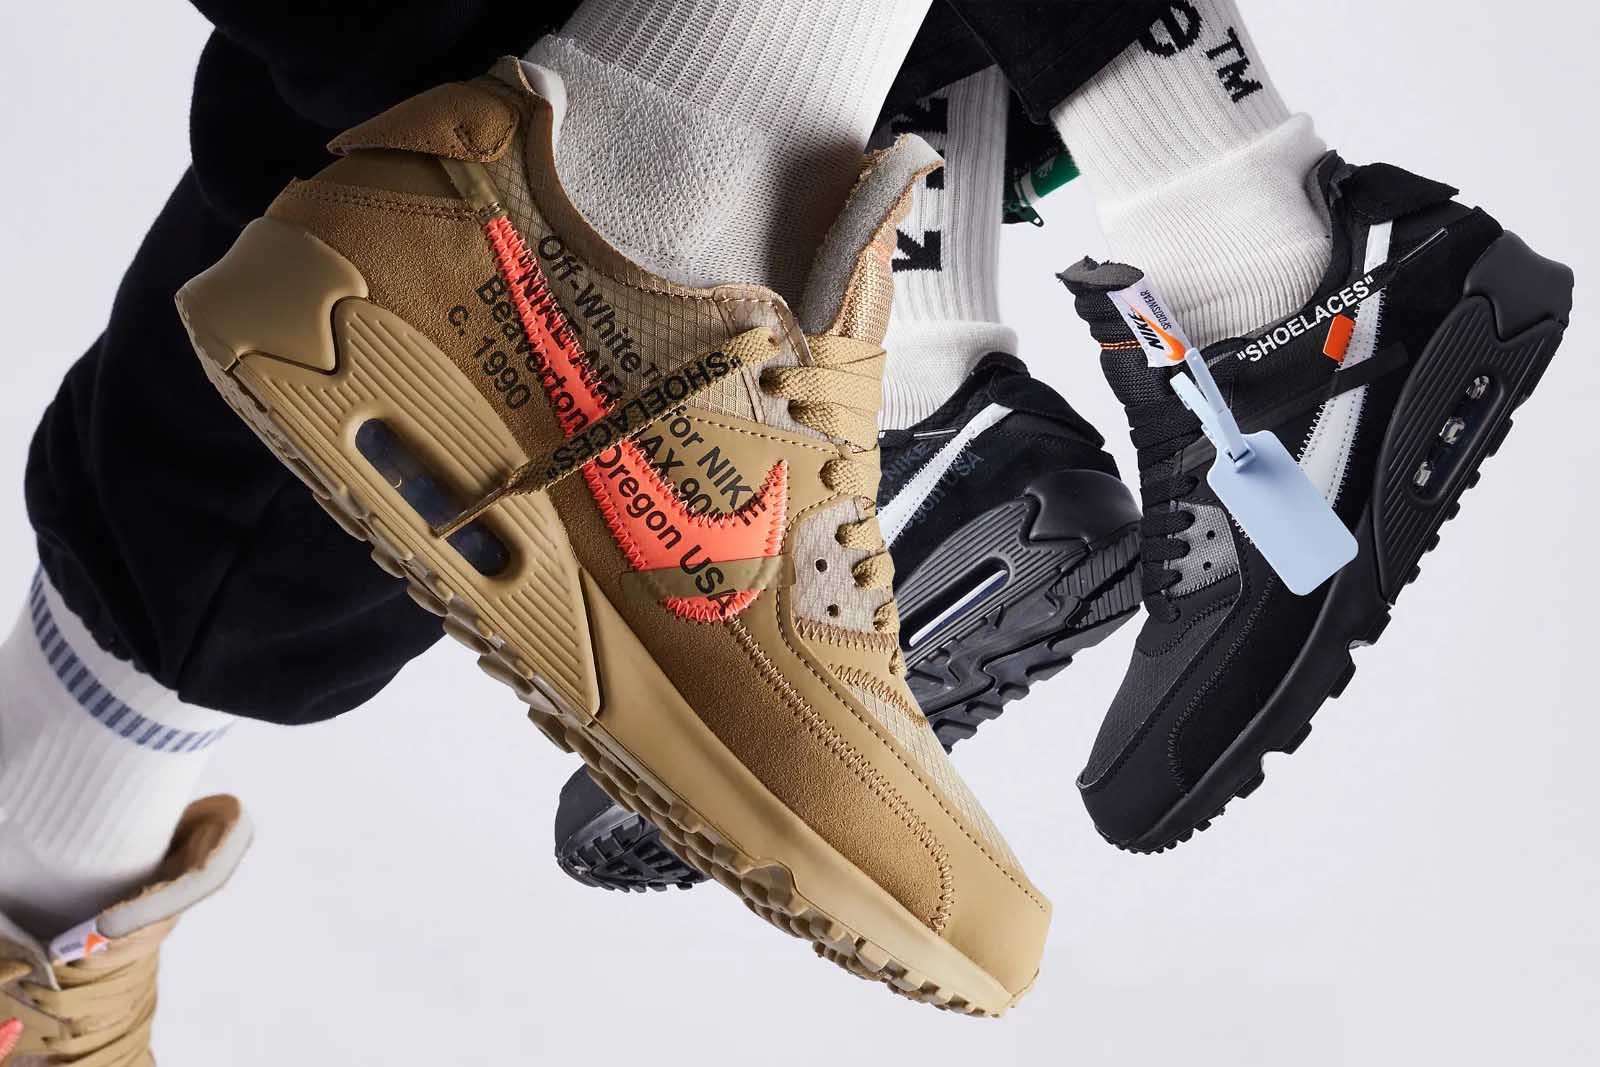 The OFF-WHITE x Nike Air Max 90 Release 